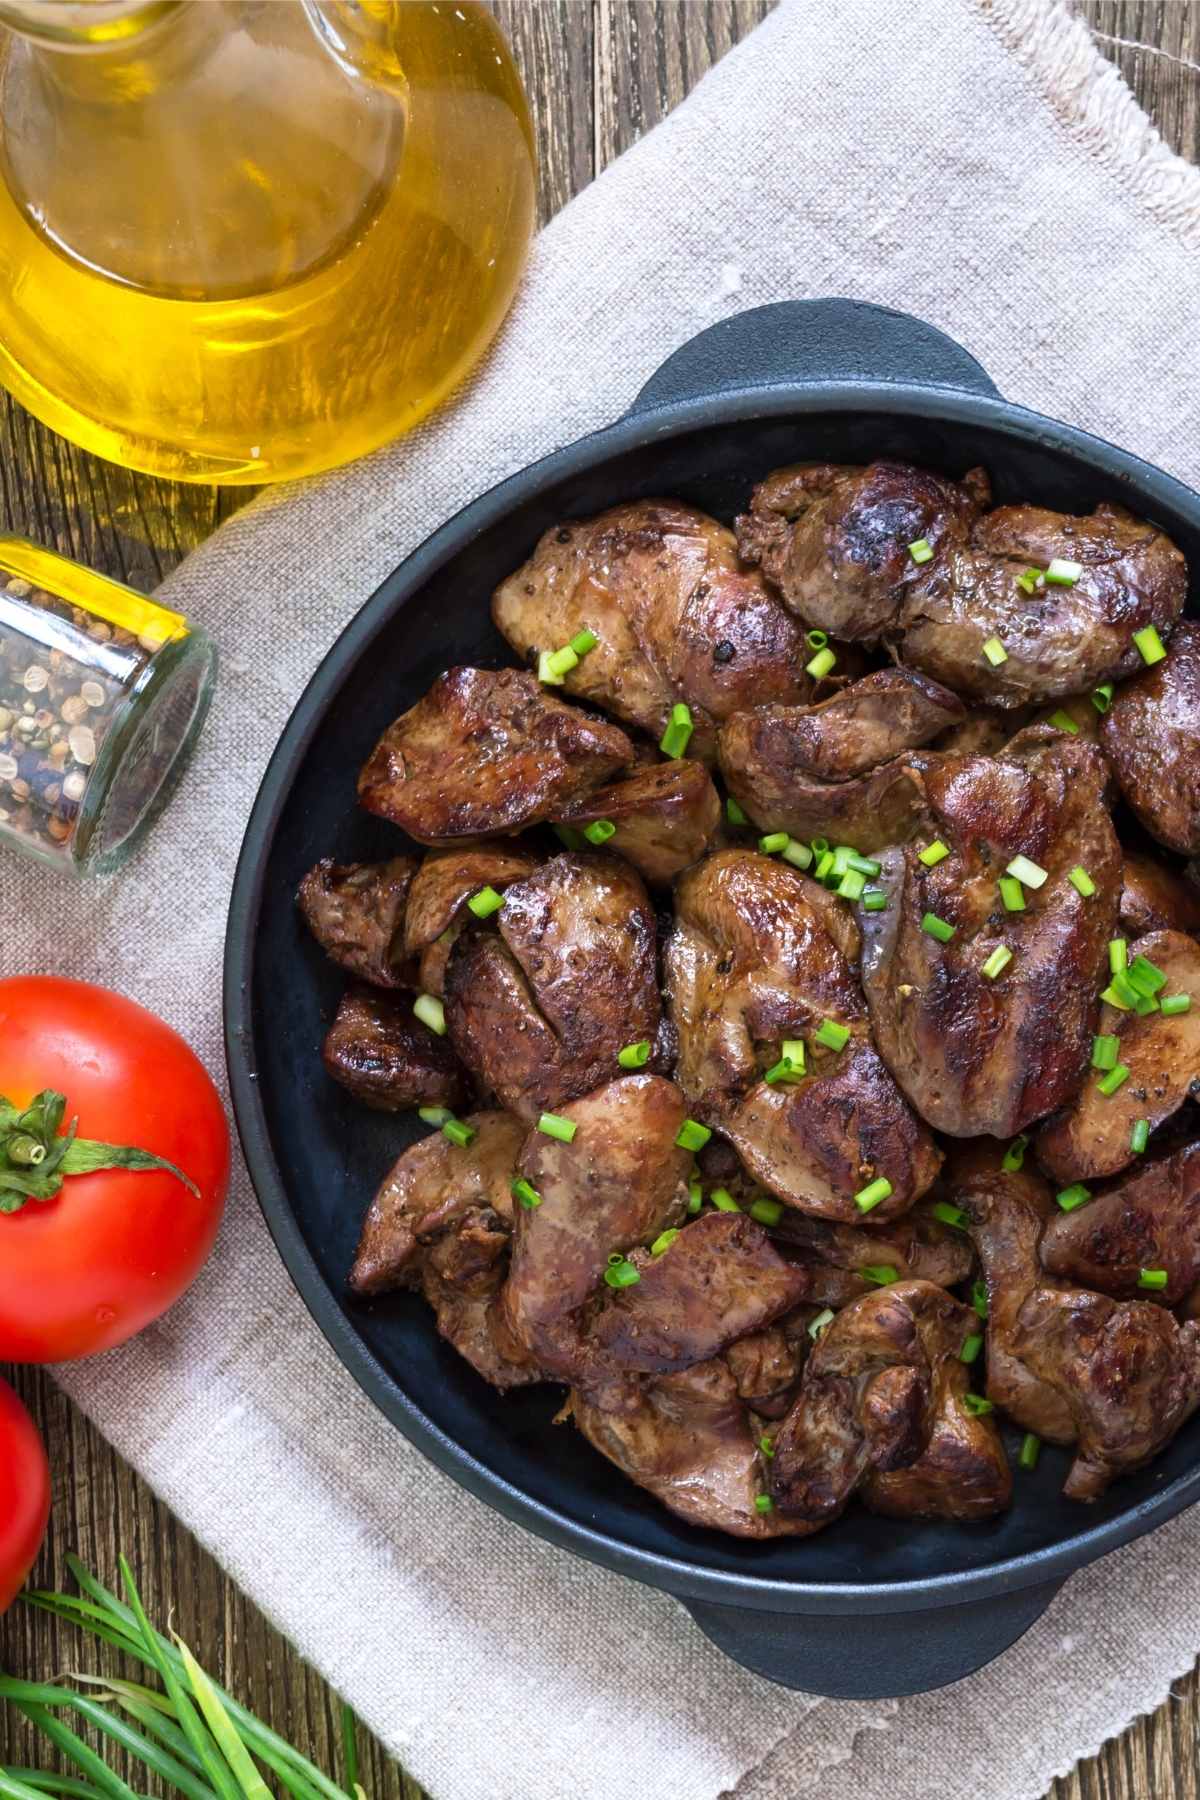 When chicken livers are properly cooked, they absolutely delicious! It’s also an excellent source of iron, easy to source, and is very economical.